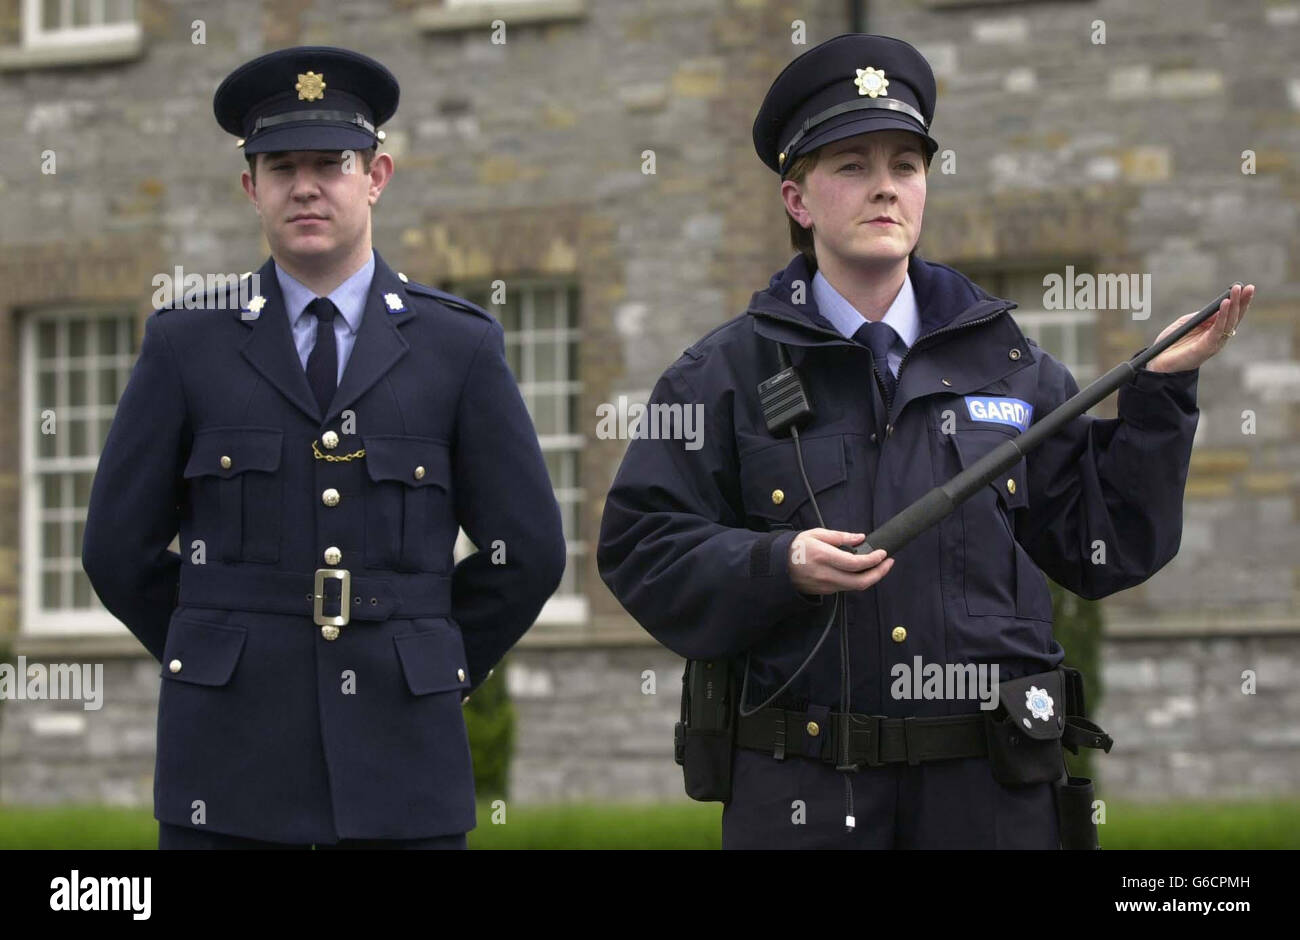 Student Garda, John Ormonde and Garda Hilda Small, model the old and new  Garda uniforms respectively, at a press conference at Garda Headquarters,  Dublin. The new uniform features a ultility belt, waterproof